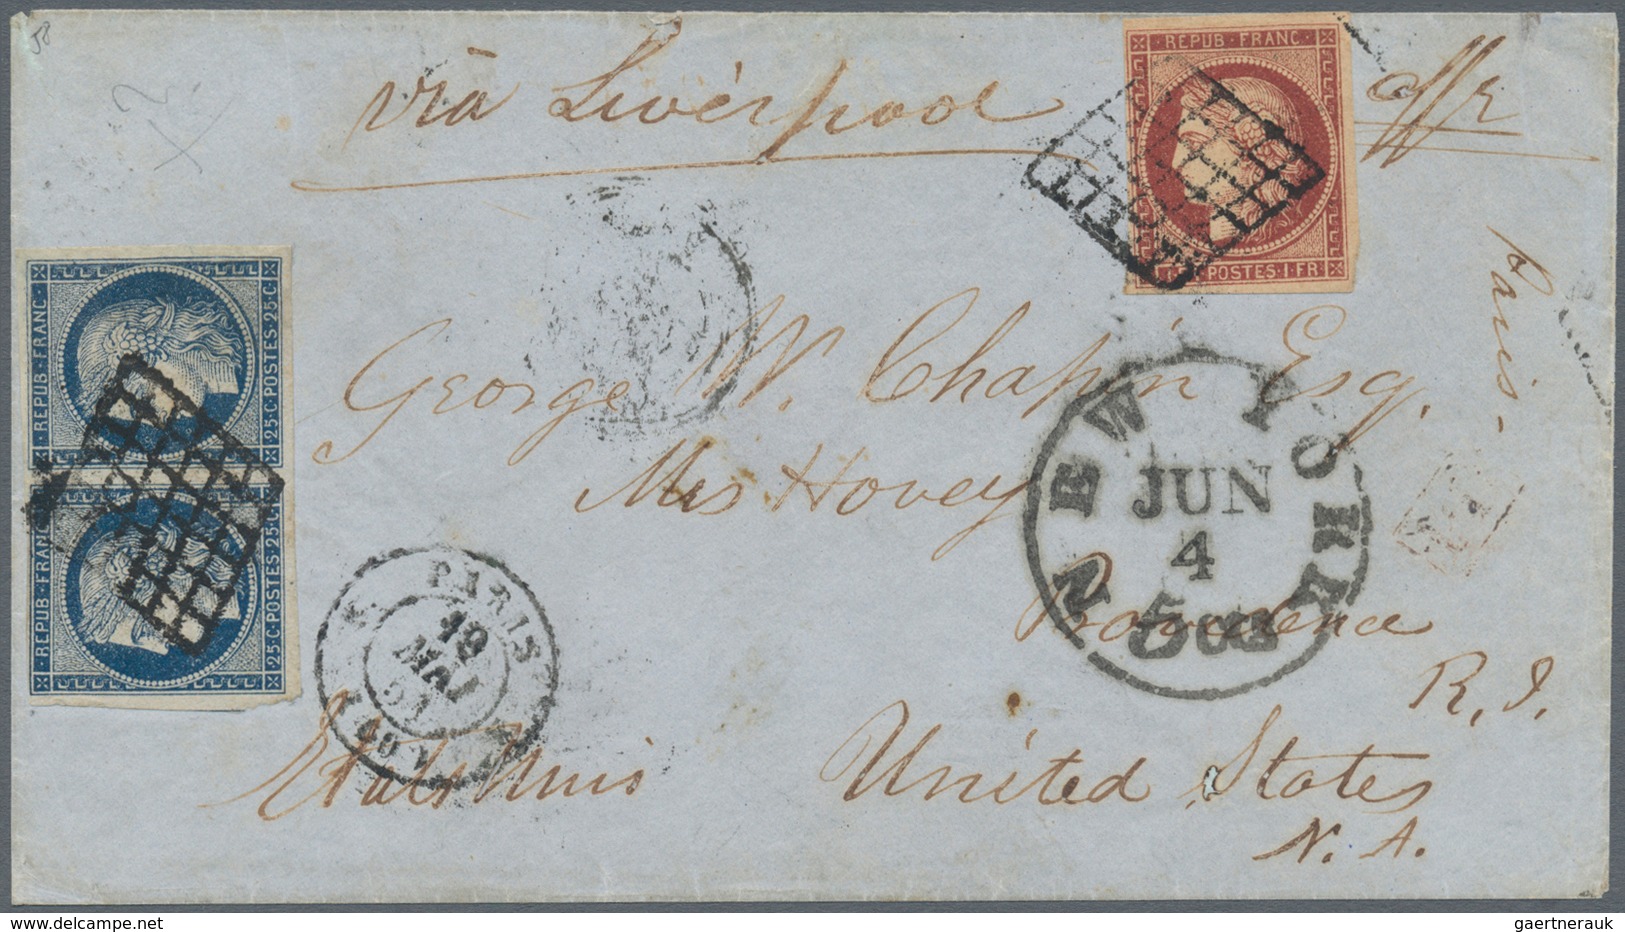 Frankreich: 1849-1870's "FRENCH POSTAL HISTORY": Collection of more than 30 special, attractive, sca